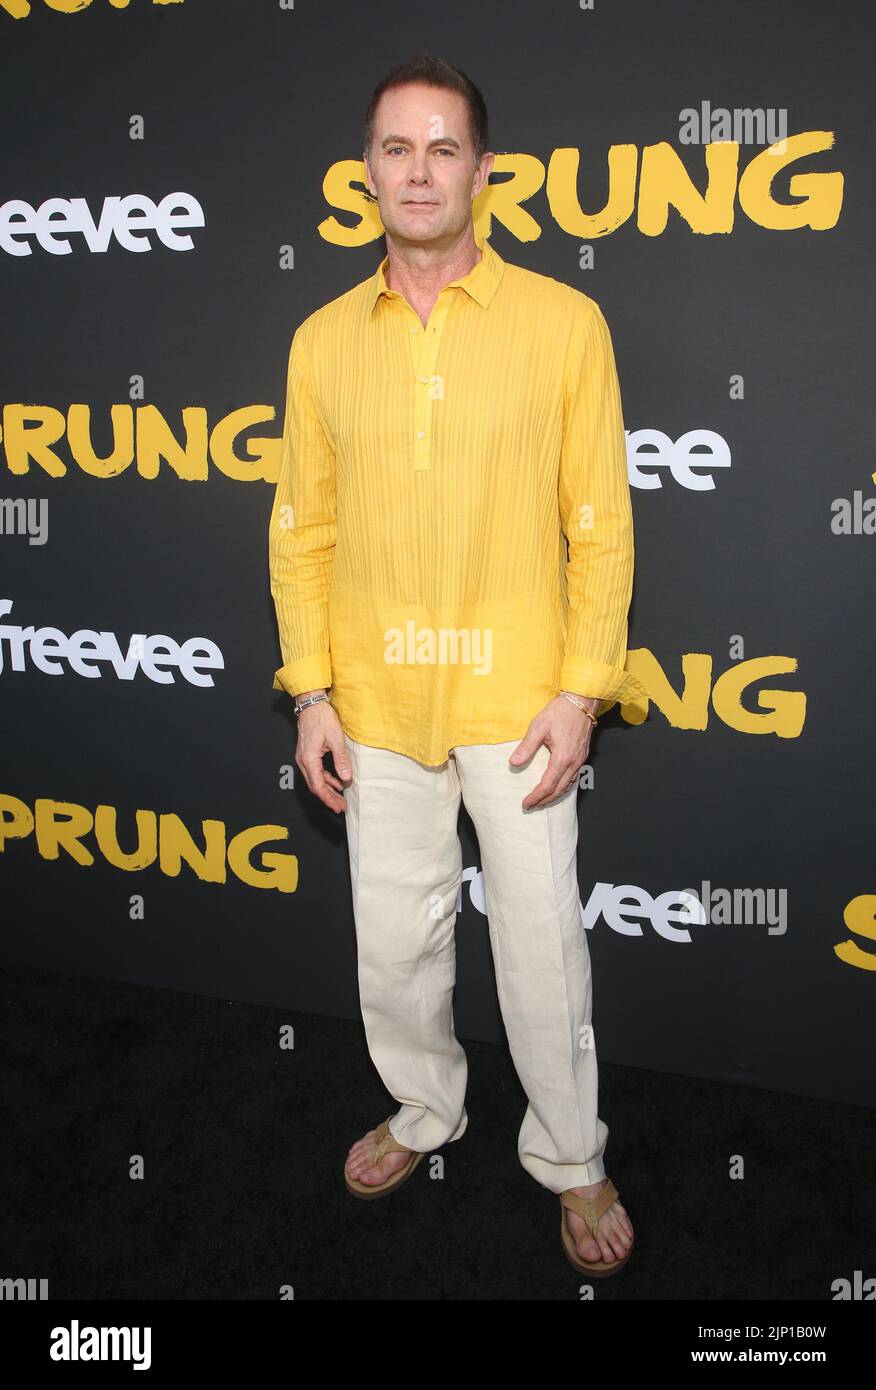 Los Angeles, California, USA. 14th Aug, 2022. Garret Dillahunt. Red Carpet Premiere Of Freevee's 'Sprung' held at the Hollywood Forever Cemetery in Los Angeles. Credit: AdMedia Photo via/Newscom/Alamy Live News Stock Photo